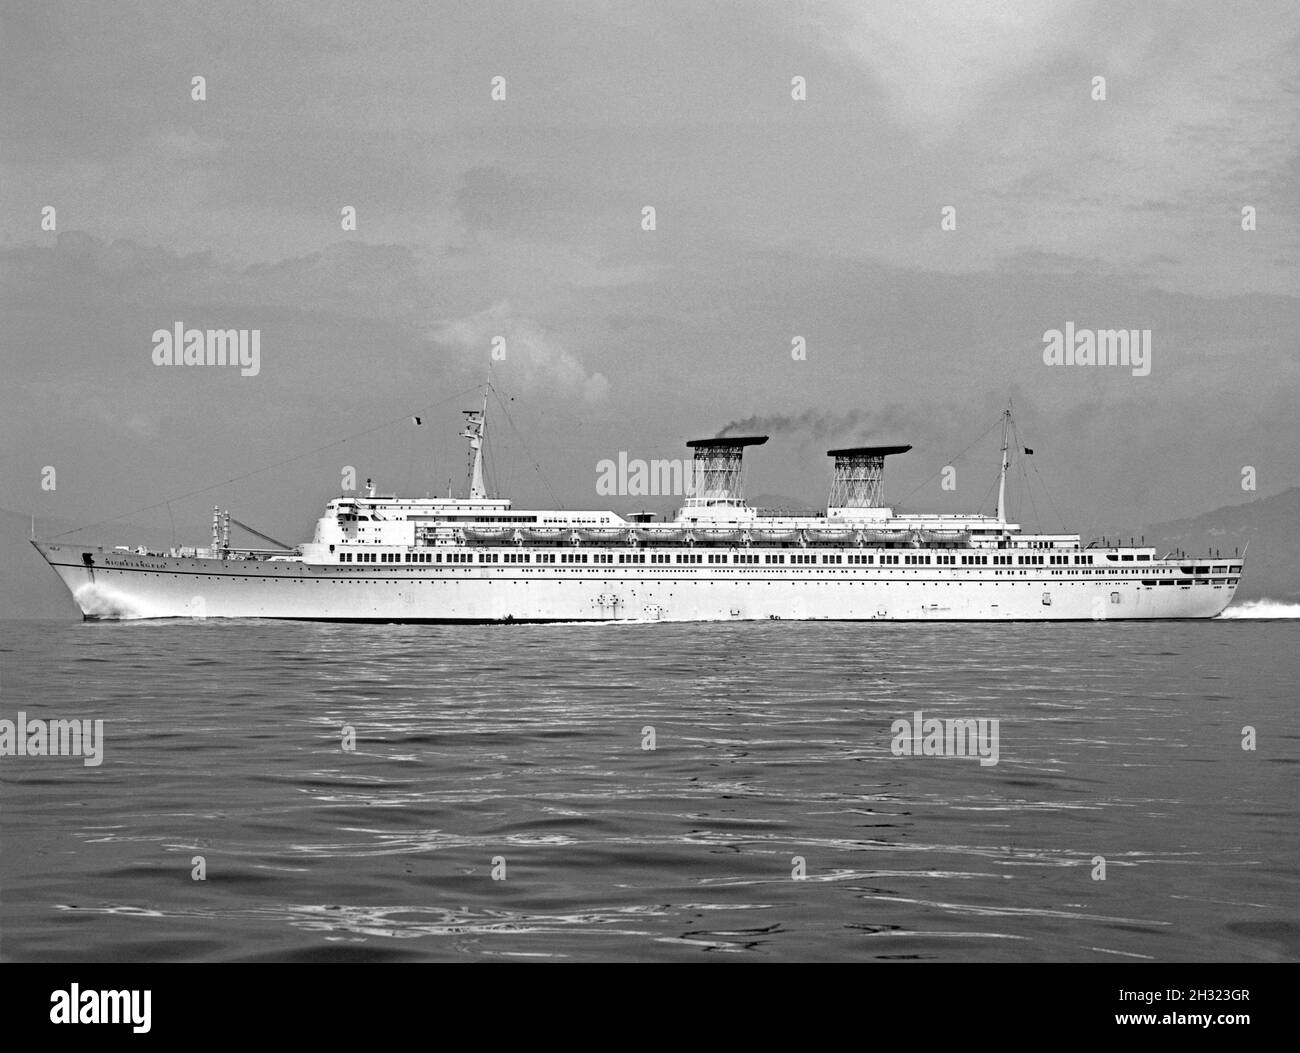 SS Michelangelo at sea in the late-1960s. The ship was an ocean liner built in 1965 for Italian Line in Genoa, Italy. She was one of the last ships to be built for the North Atlantic route, along with her sister ship was the SS Raffaello. Note the funnels, where an intricate trellis-like pipework allowed wind to pass through the funnel and a large smoke deflector fin on the top. The design proved to be very effective. The ship ended up in Bandar Abbas, Iran where she spent 15 years as a floating barracks. Plans to reconstruct her as the cruise ship came to nothing and in 1991 she was scrapped. Stock Photo